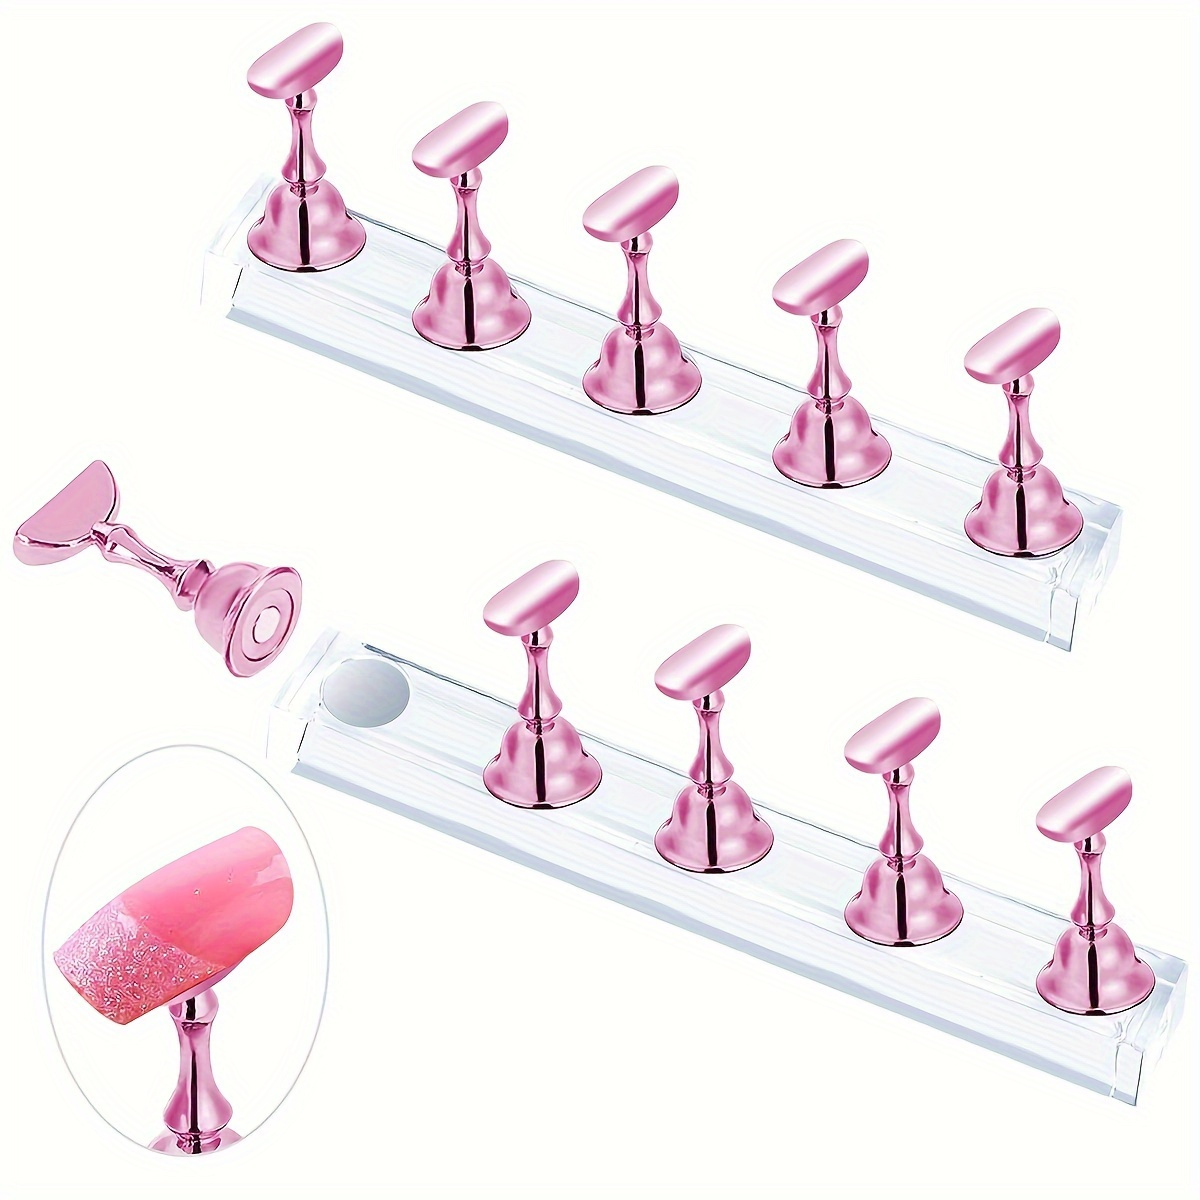 

2 Sets Magnetic Nail Practice Stand, Acrylic Nail Display Holder, Unscented Manicure Tool For False Nail Salon Use - Diy Fingernail Art Accessories Set